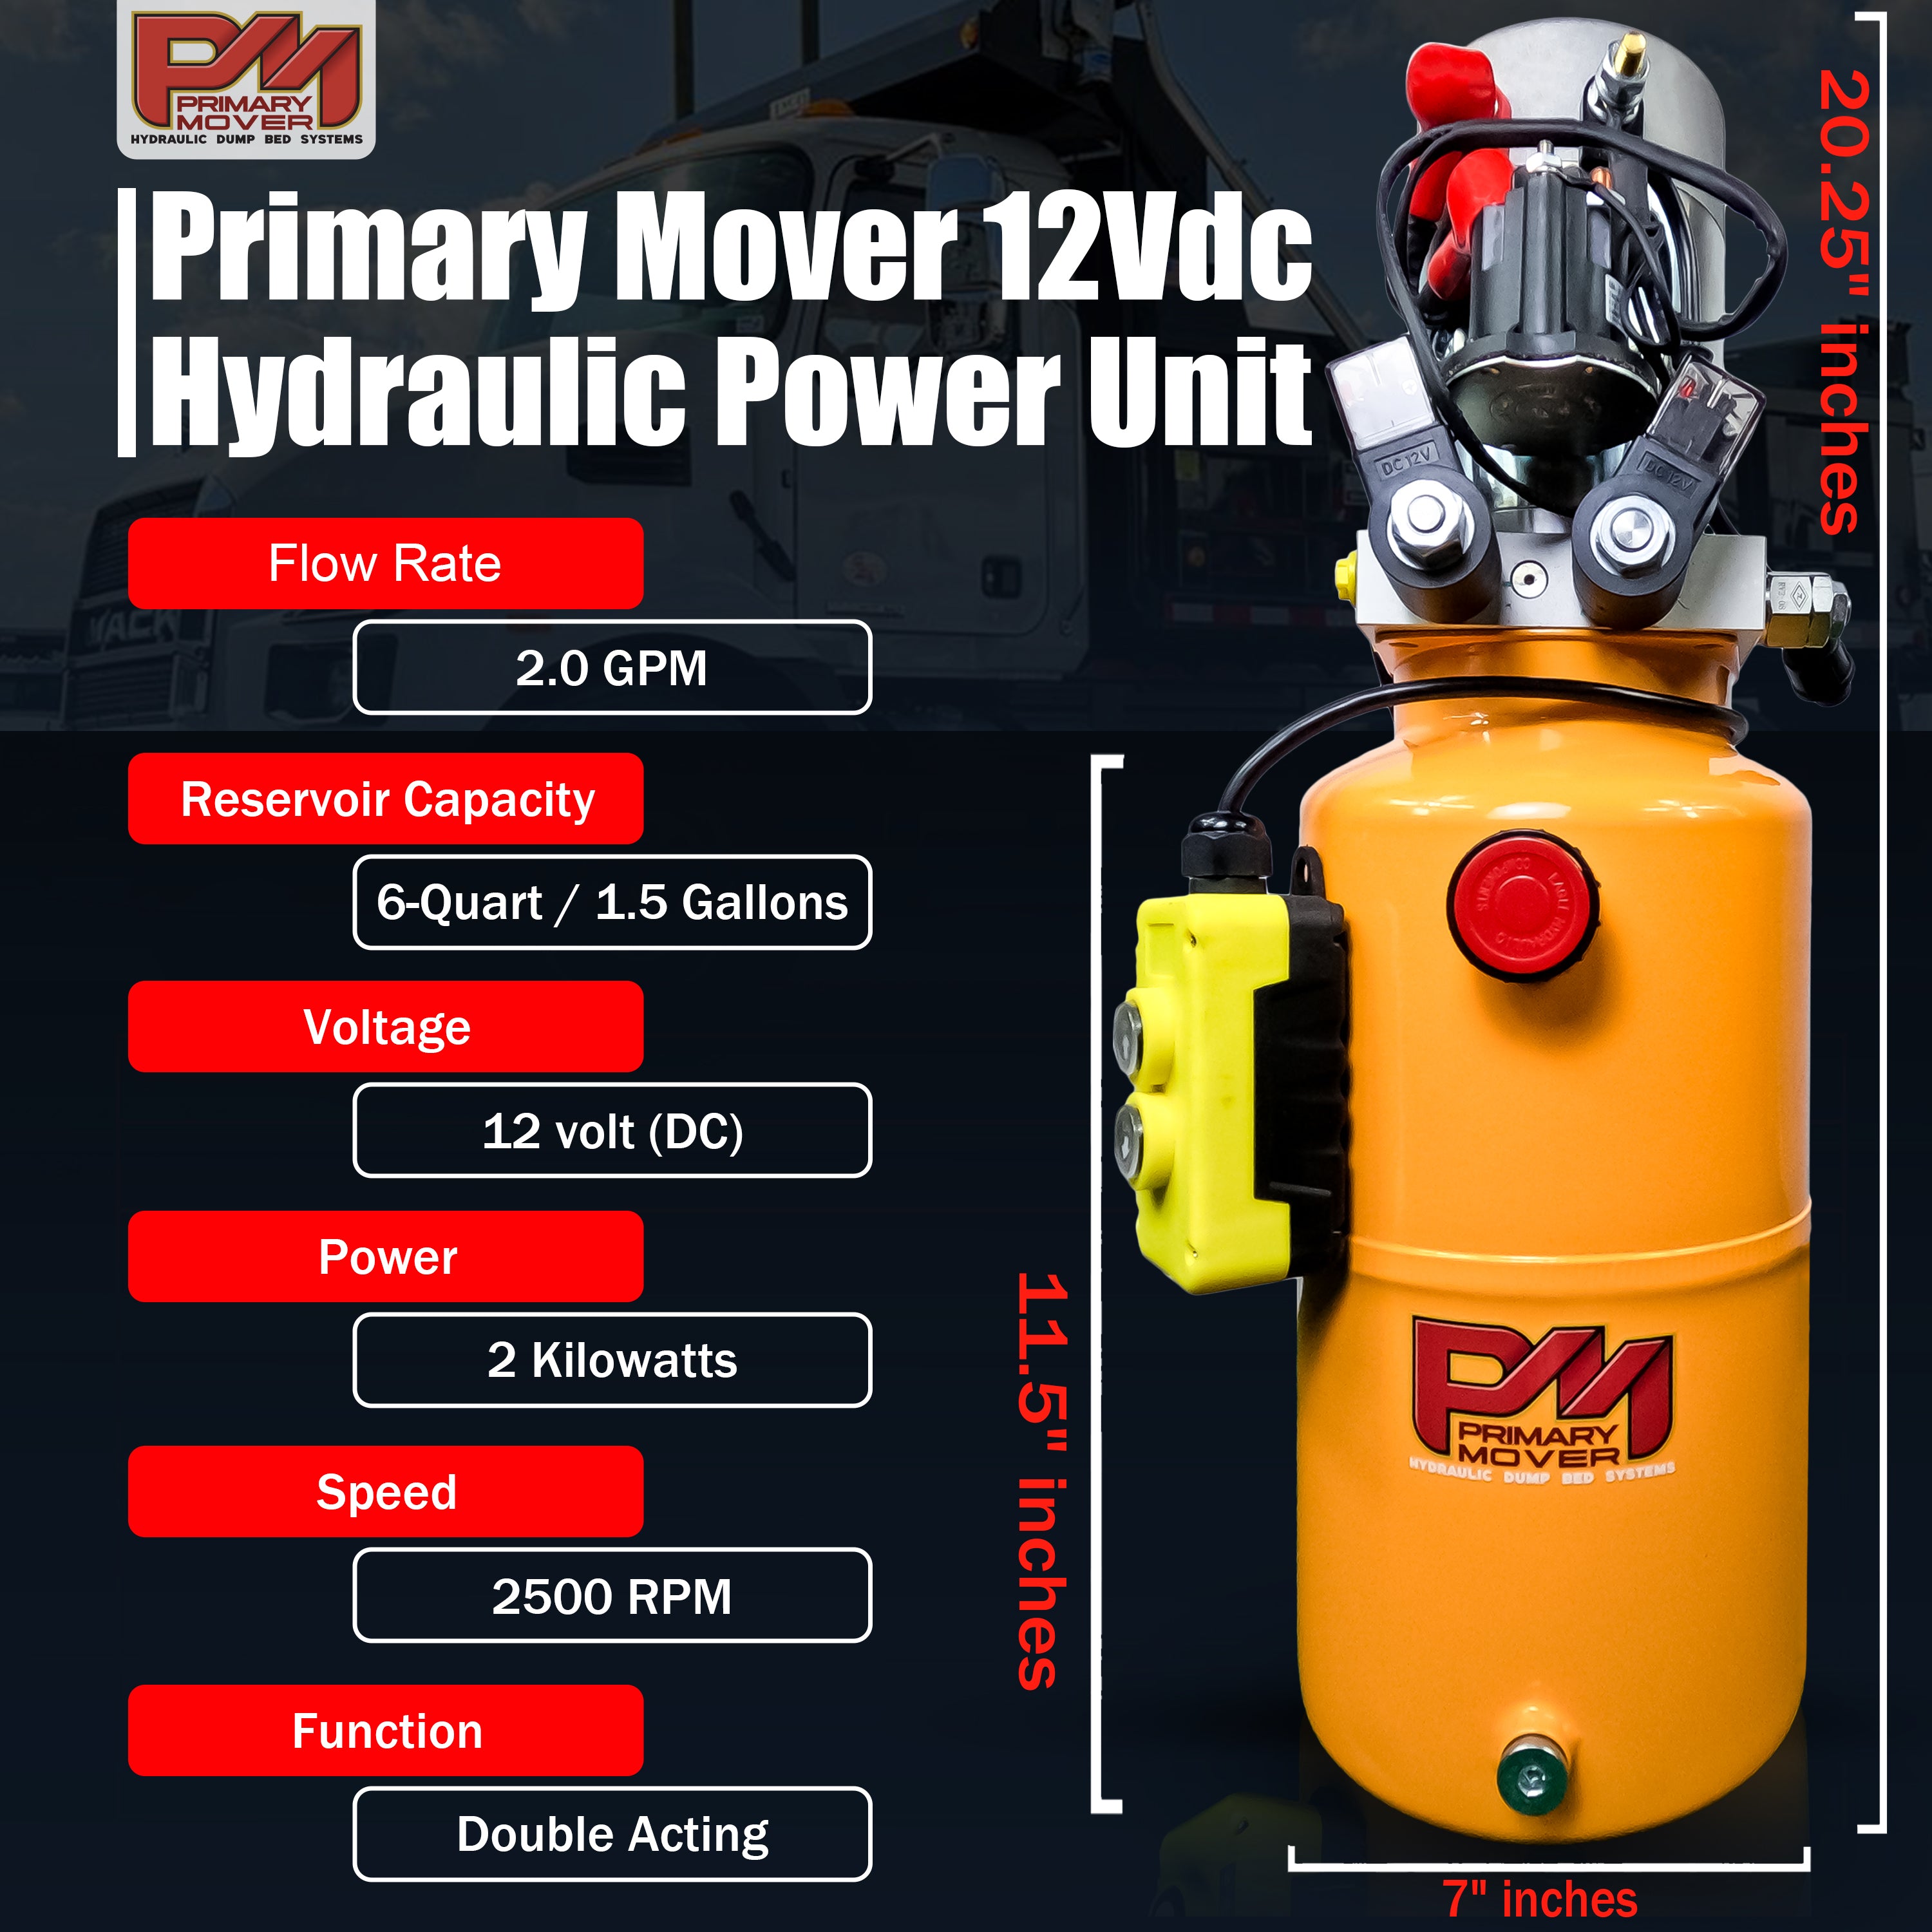 Primary Mover Double Acting 12VDC Hydraulic Power Unit with Steel Reservoirs, featuring dual-acting precision and quality craftsmanship for hydraulic dump bed systems. Swift, efficient operation for industrial and commercial settings.